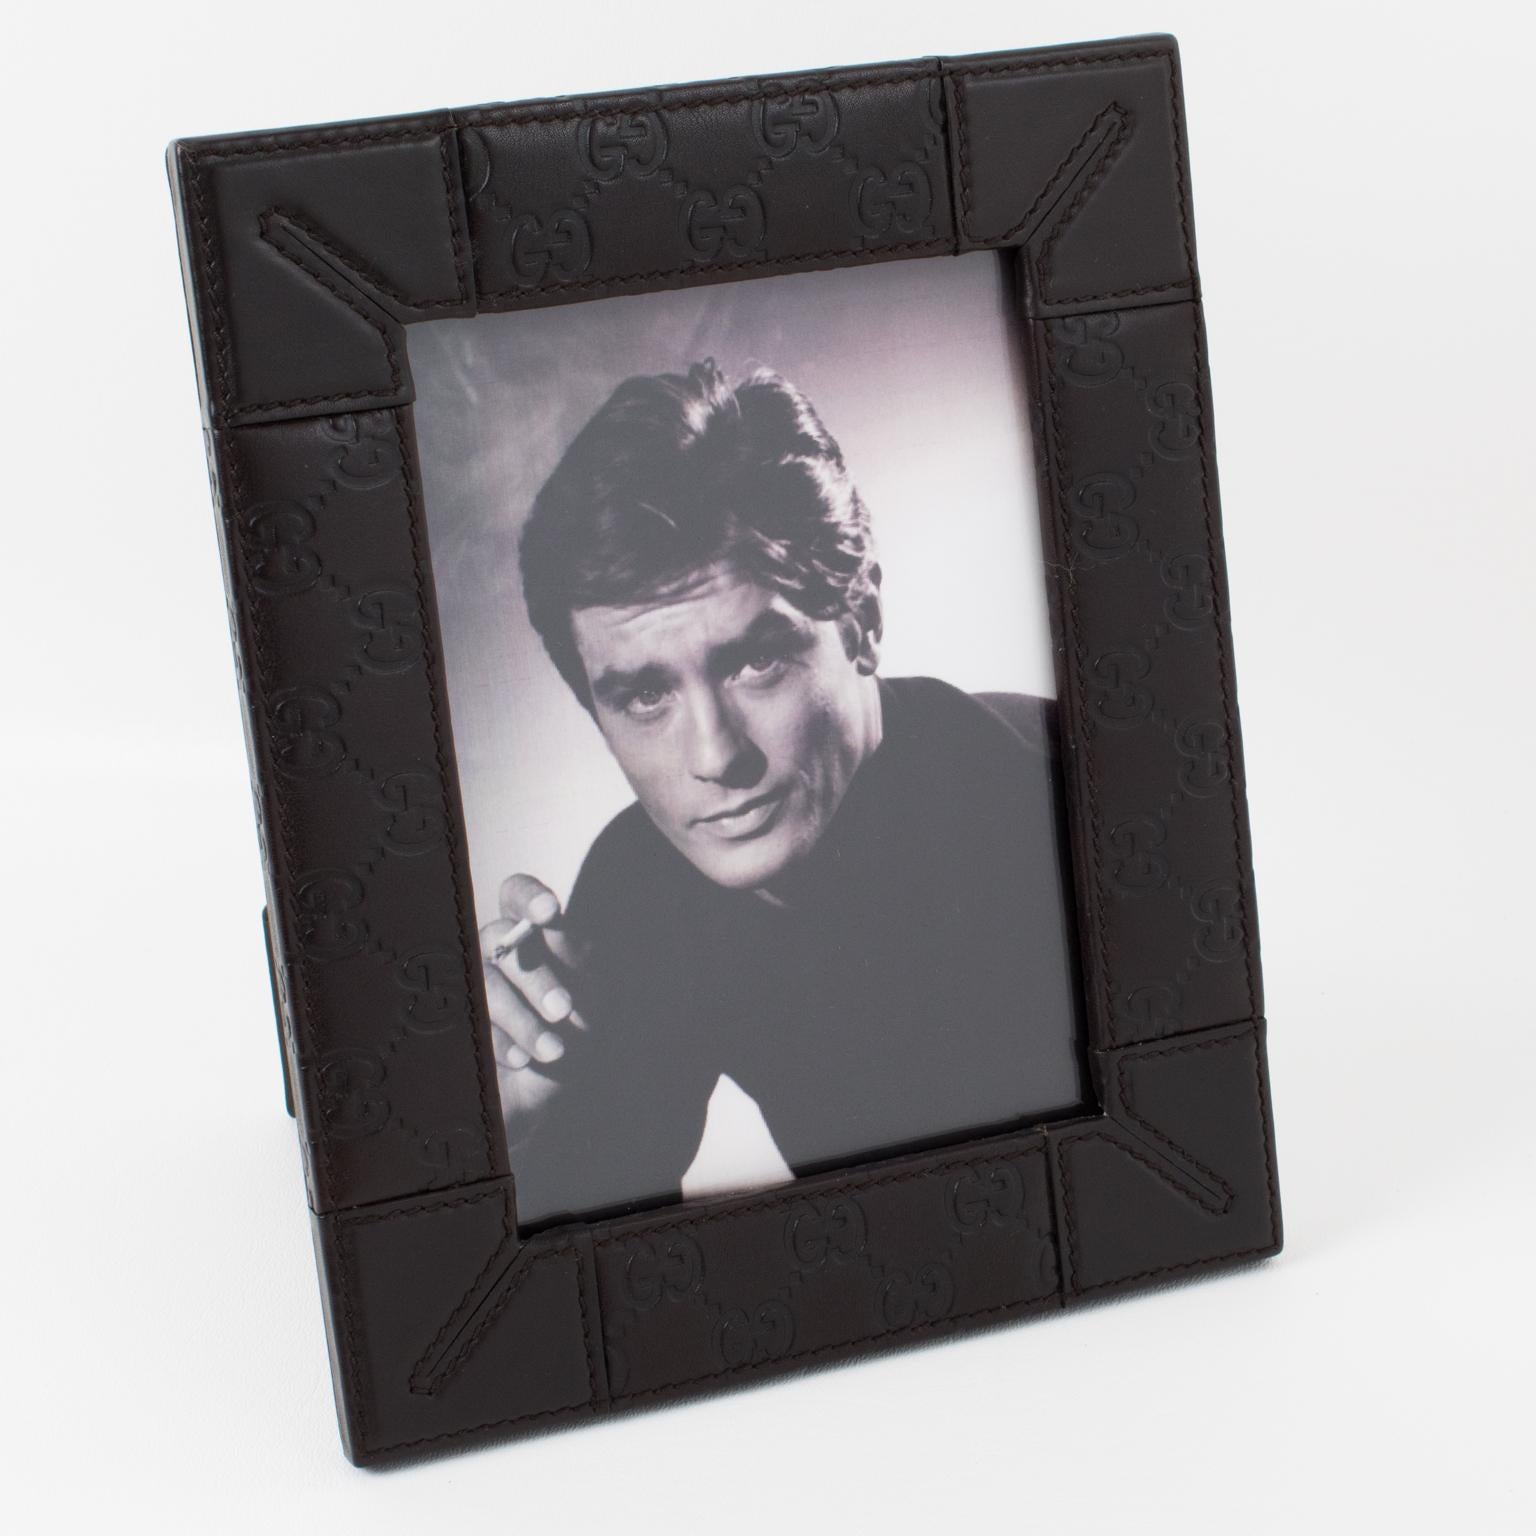 Superb picture photo frame by Italian designer Gucci. Timeless and elegant black leather with the 